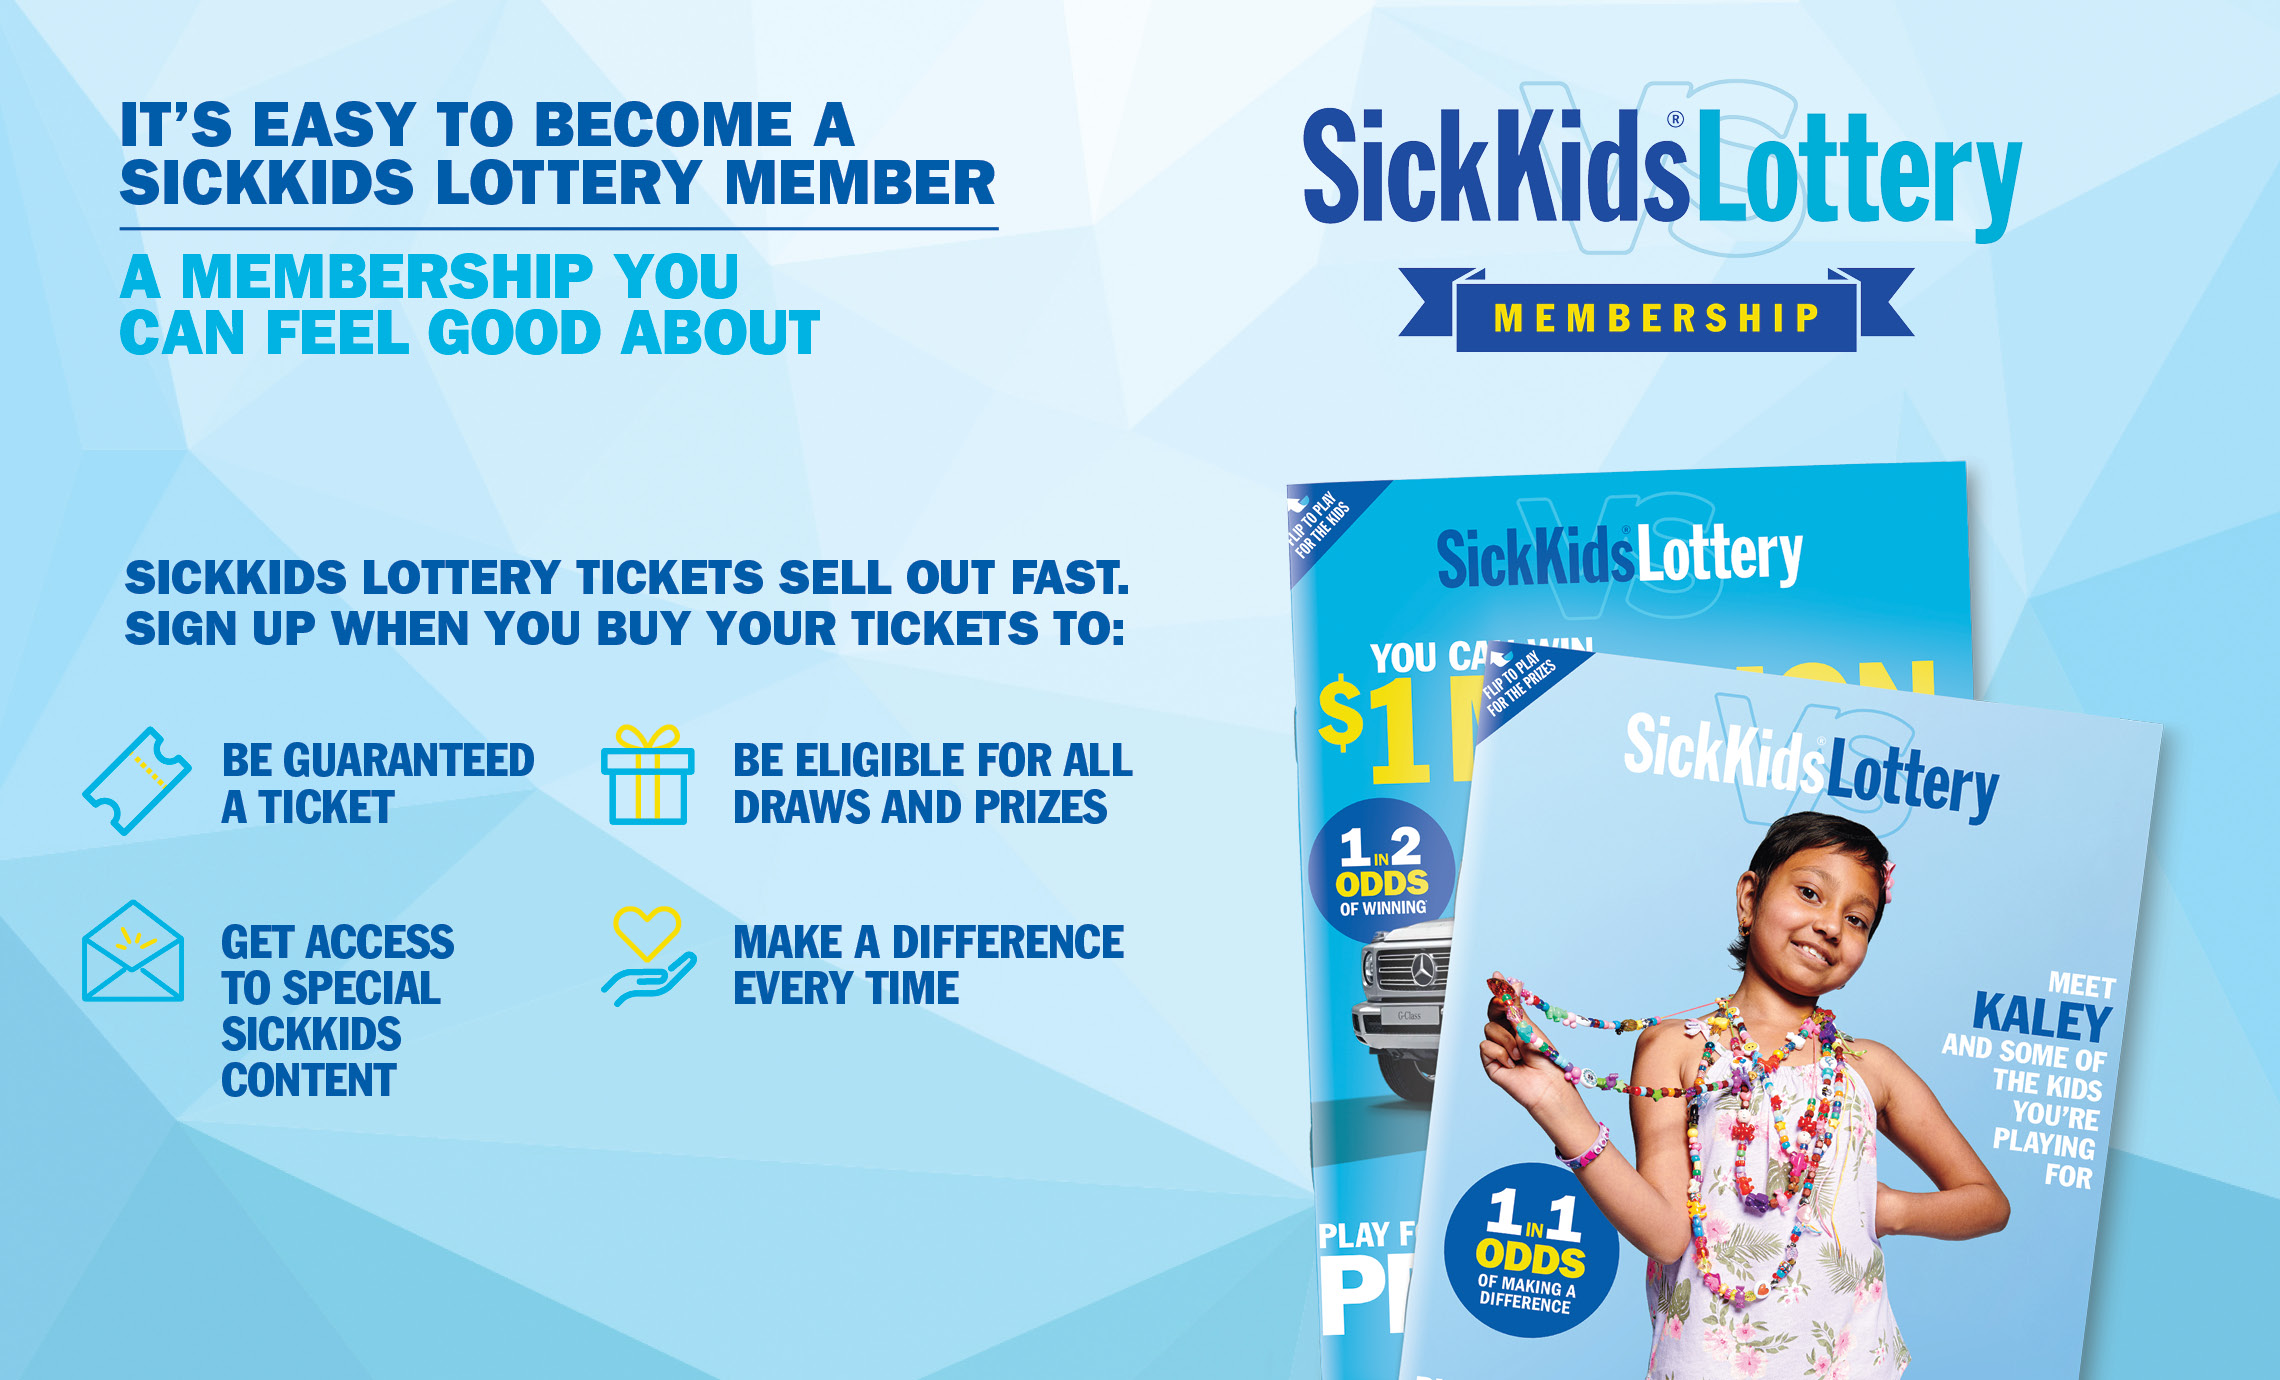 IT'S EASY TO BECOME A SICKKIDS LOTTERY MEMBER, A MEMBERSHIP YOU CAN FEEL GOOD ABOUT